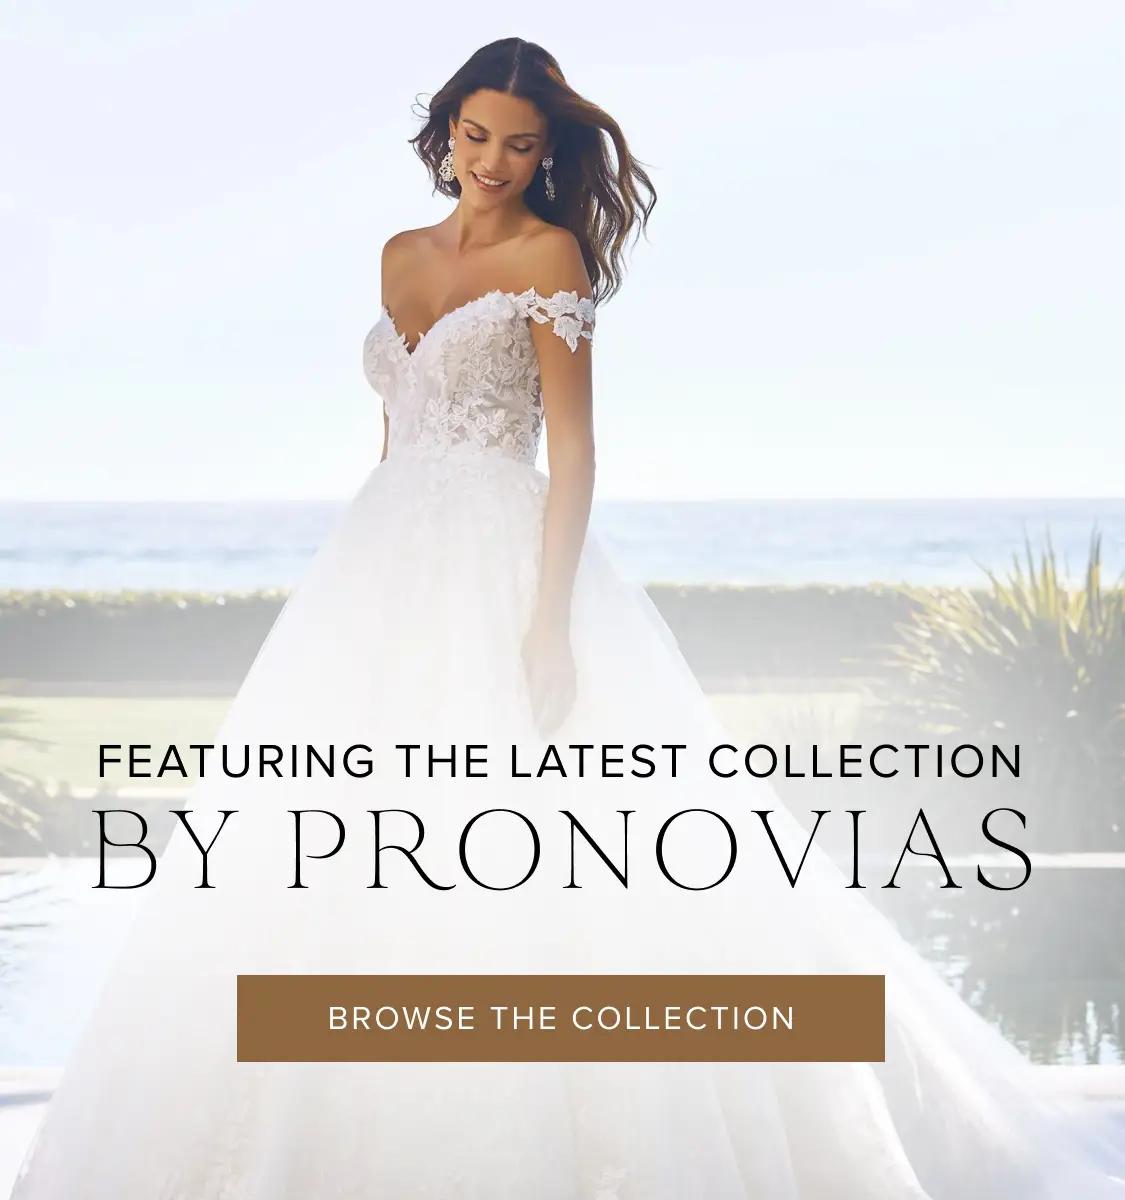 featuring pronovias banner for mobile